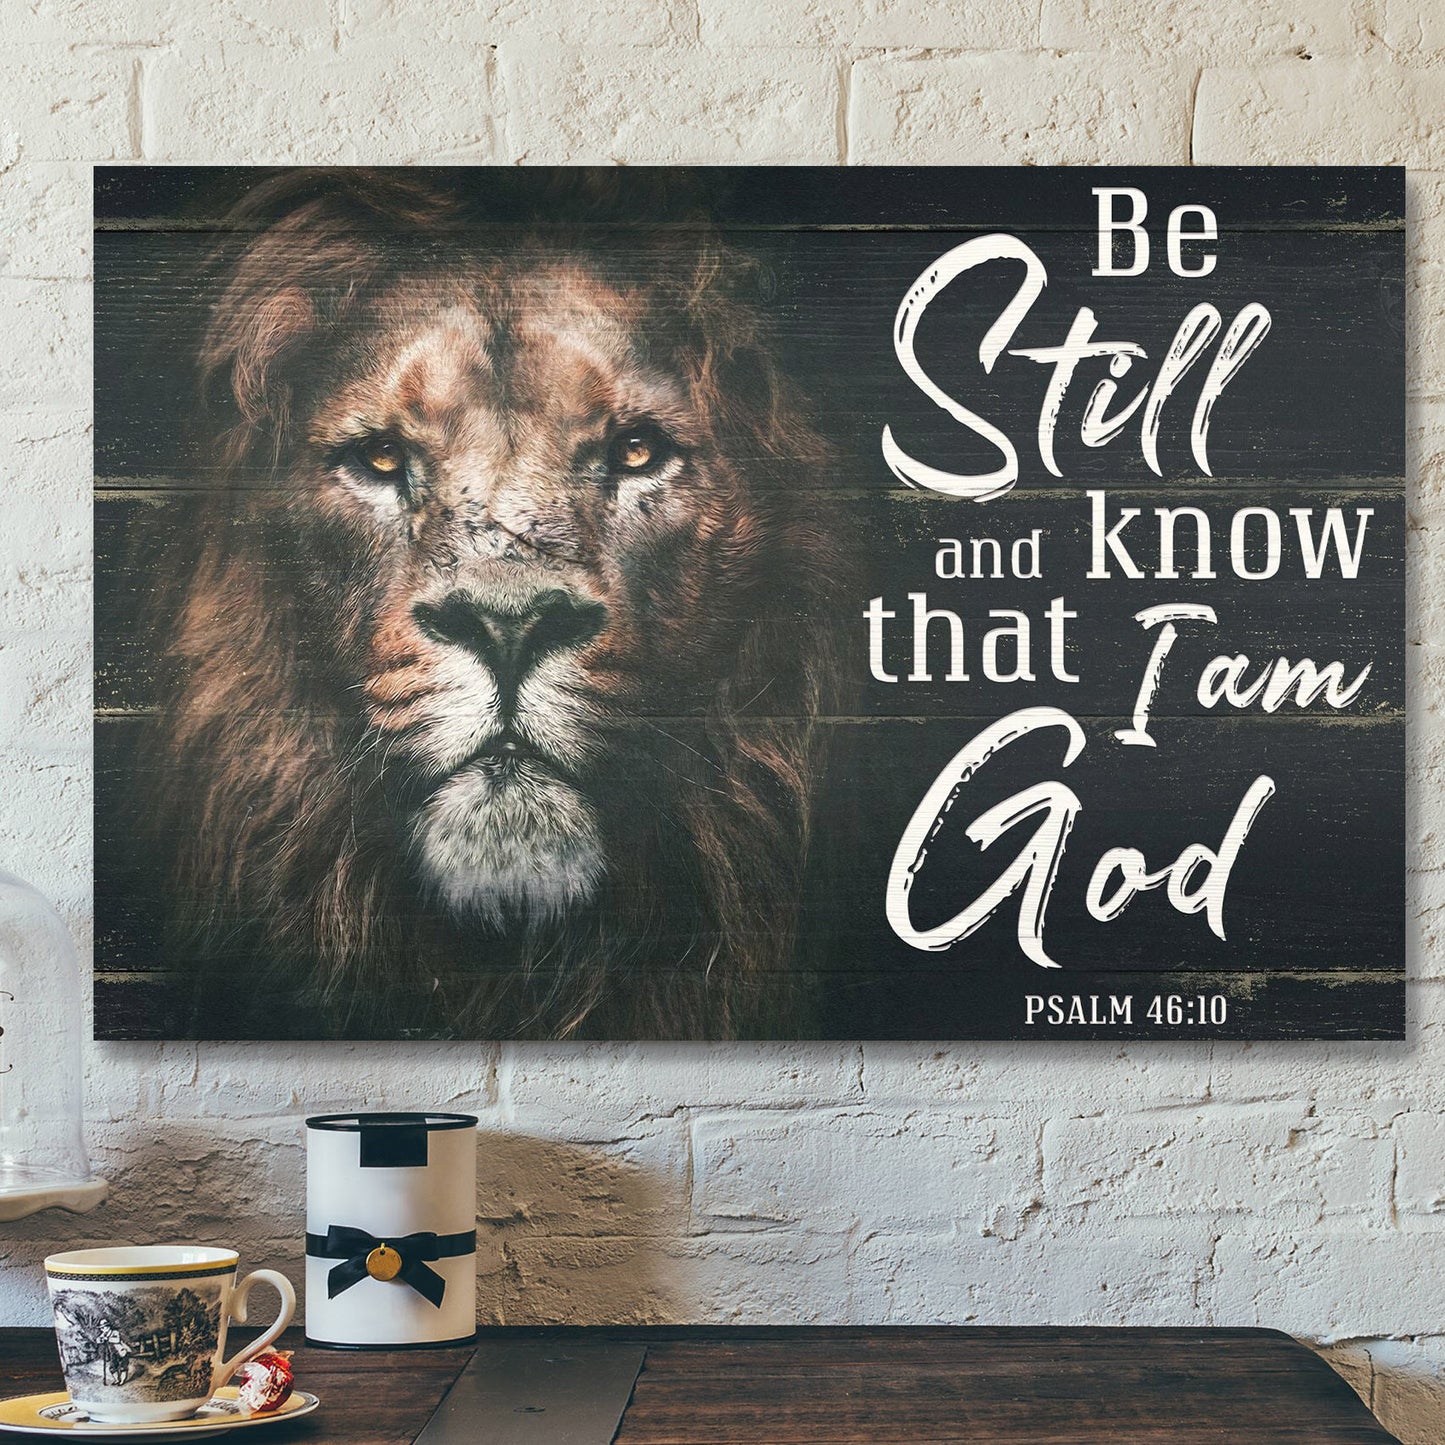 Lion Canvas - Be Still And Know That I Am God Canvas Wall Art - Bible Verse Canvas - Scripture Canvas Wall Art - Ciaocustom